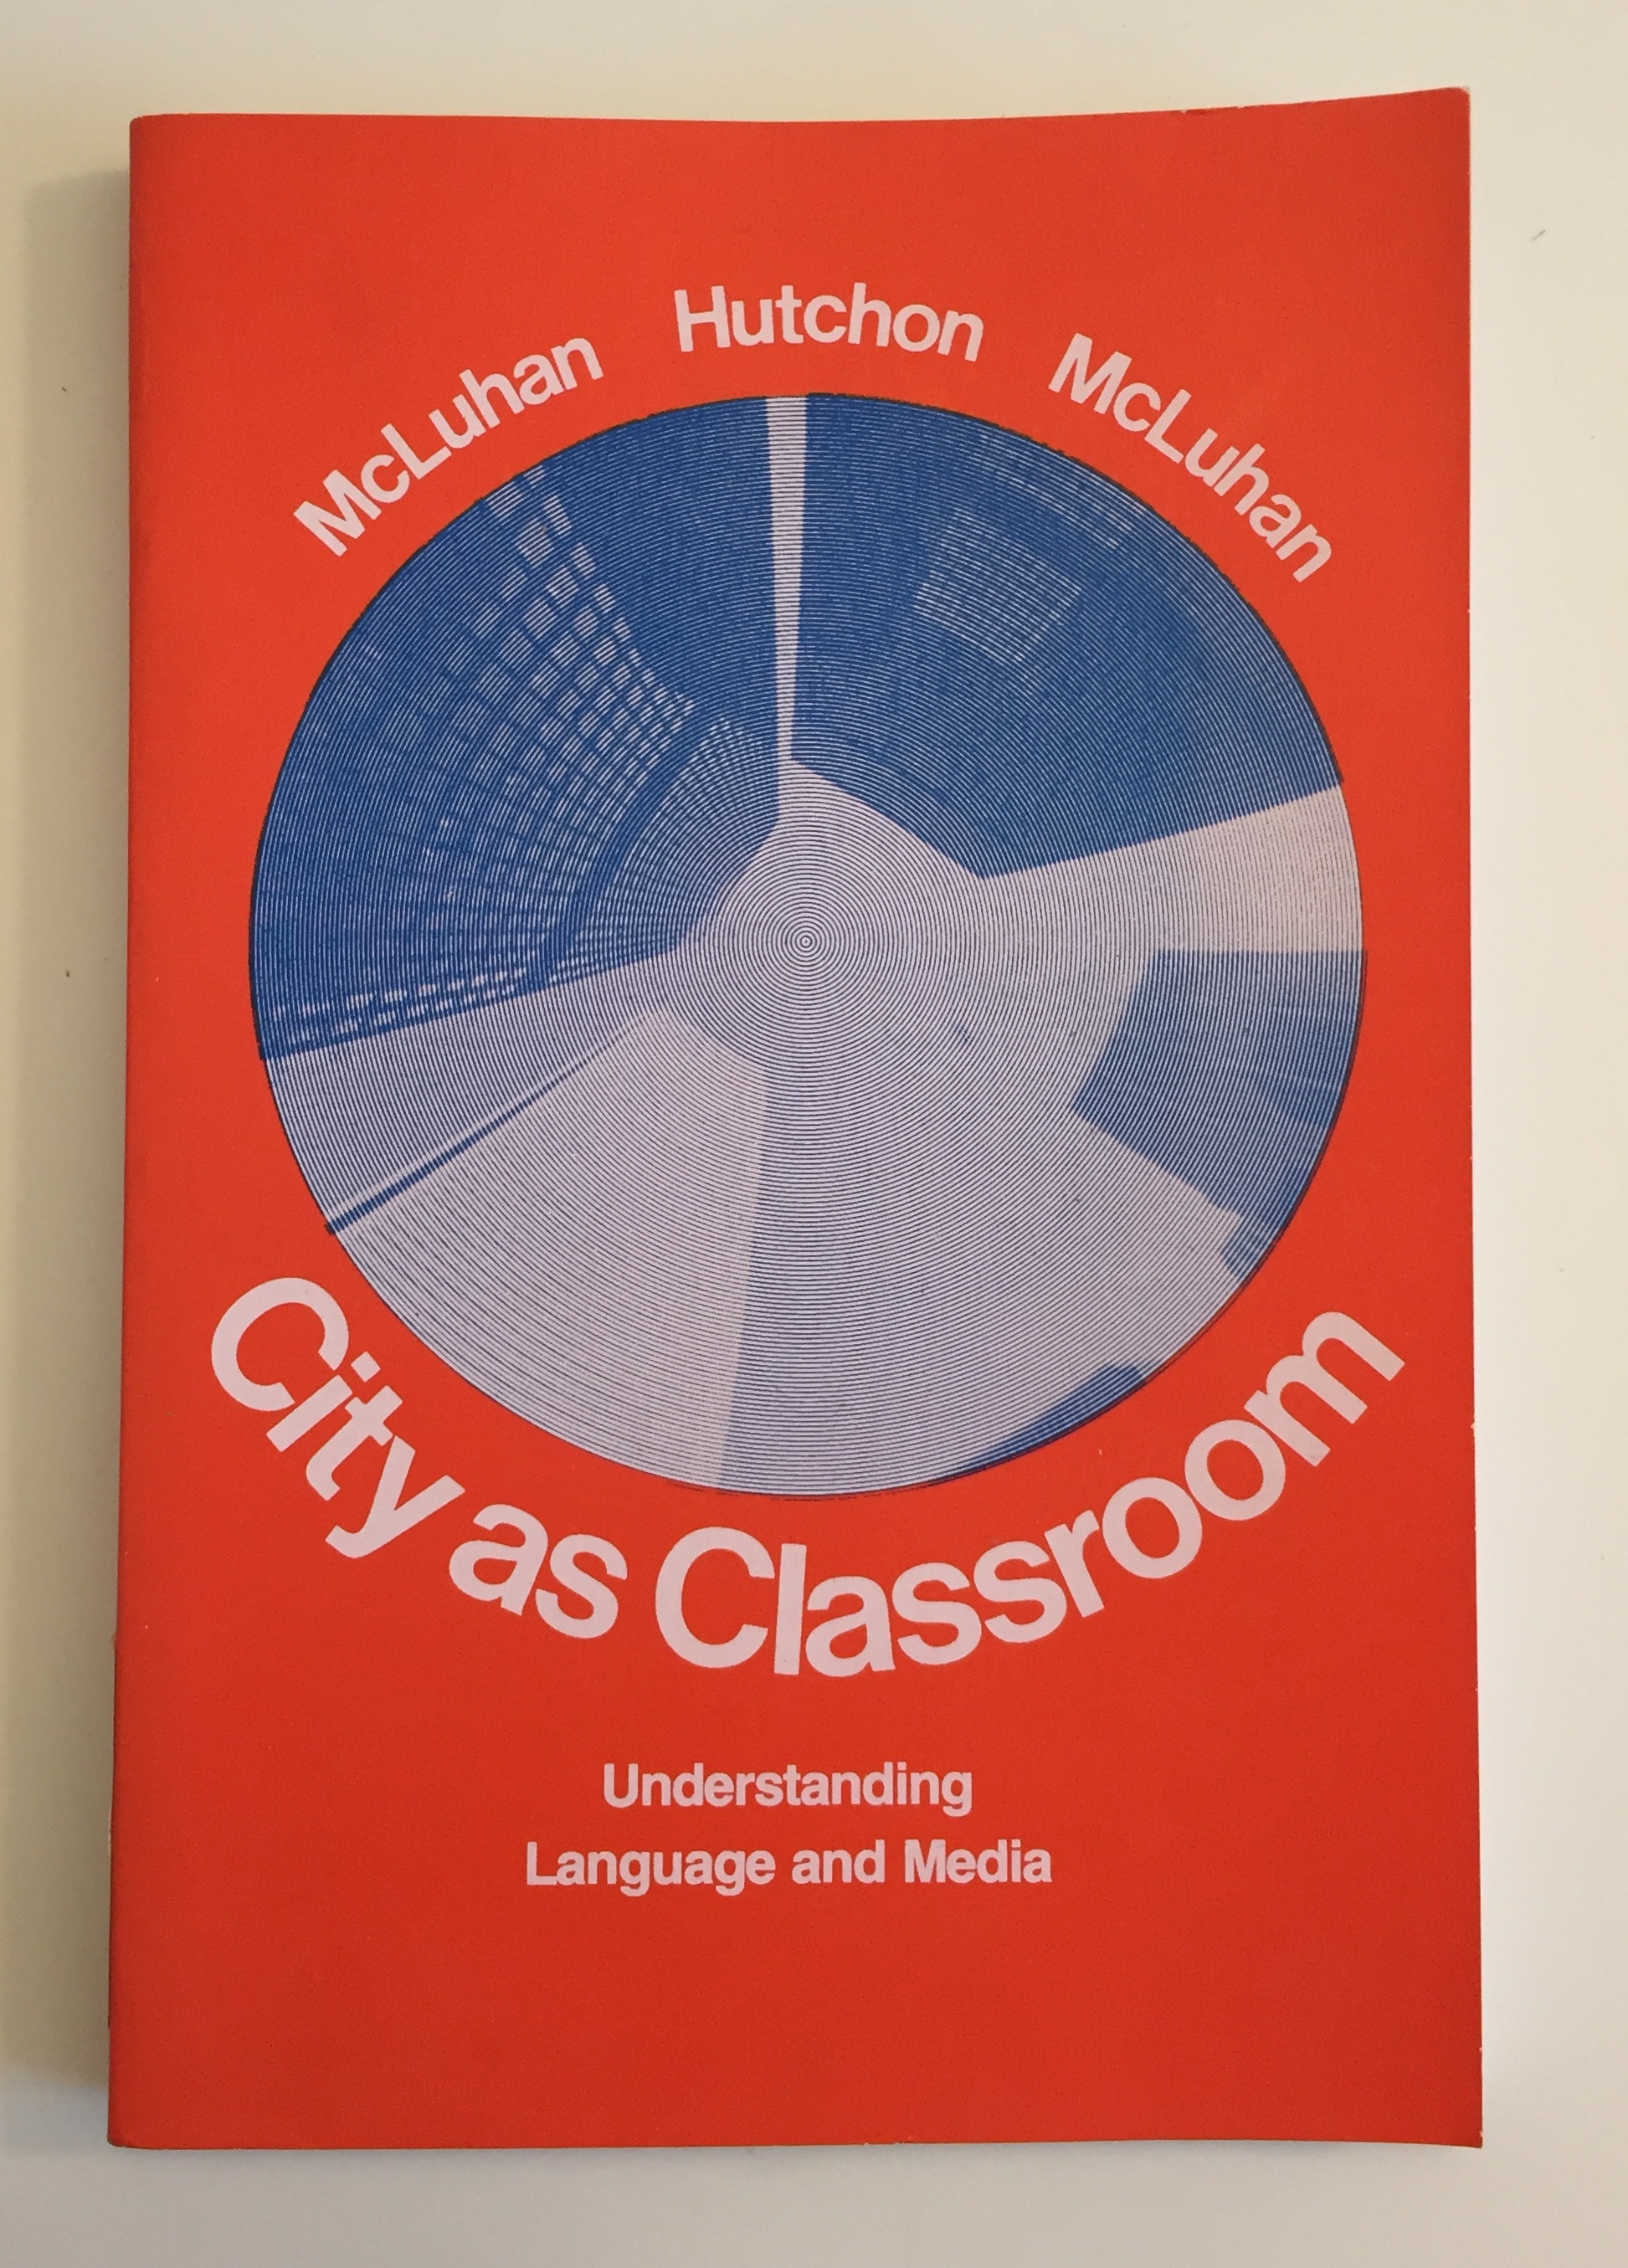 Cover of City as Classroom textbook, orange background with circular grey skyscraper image.